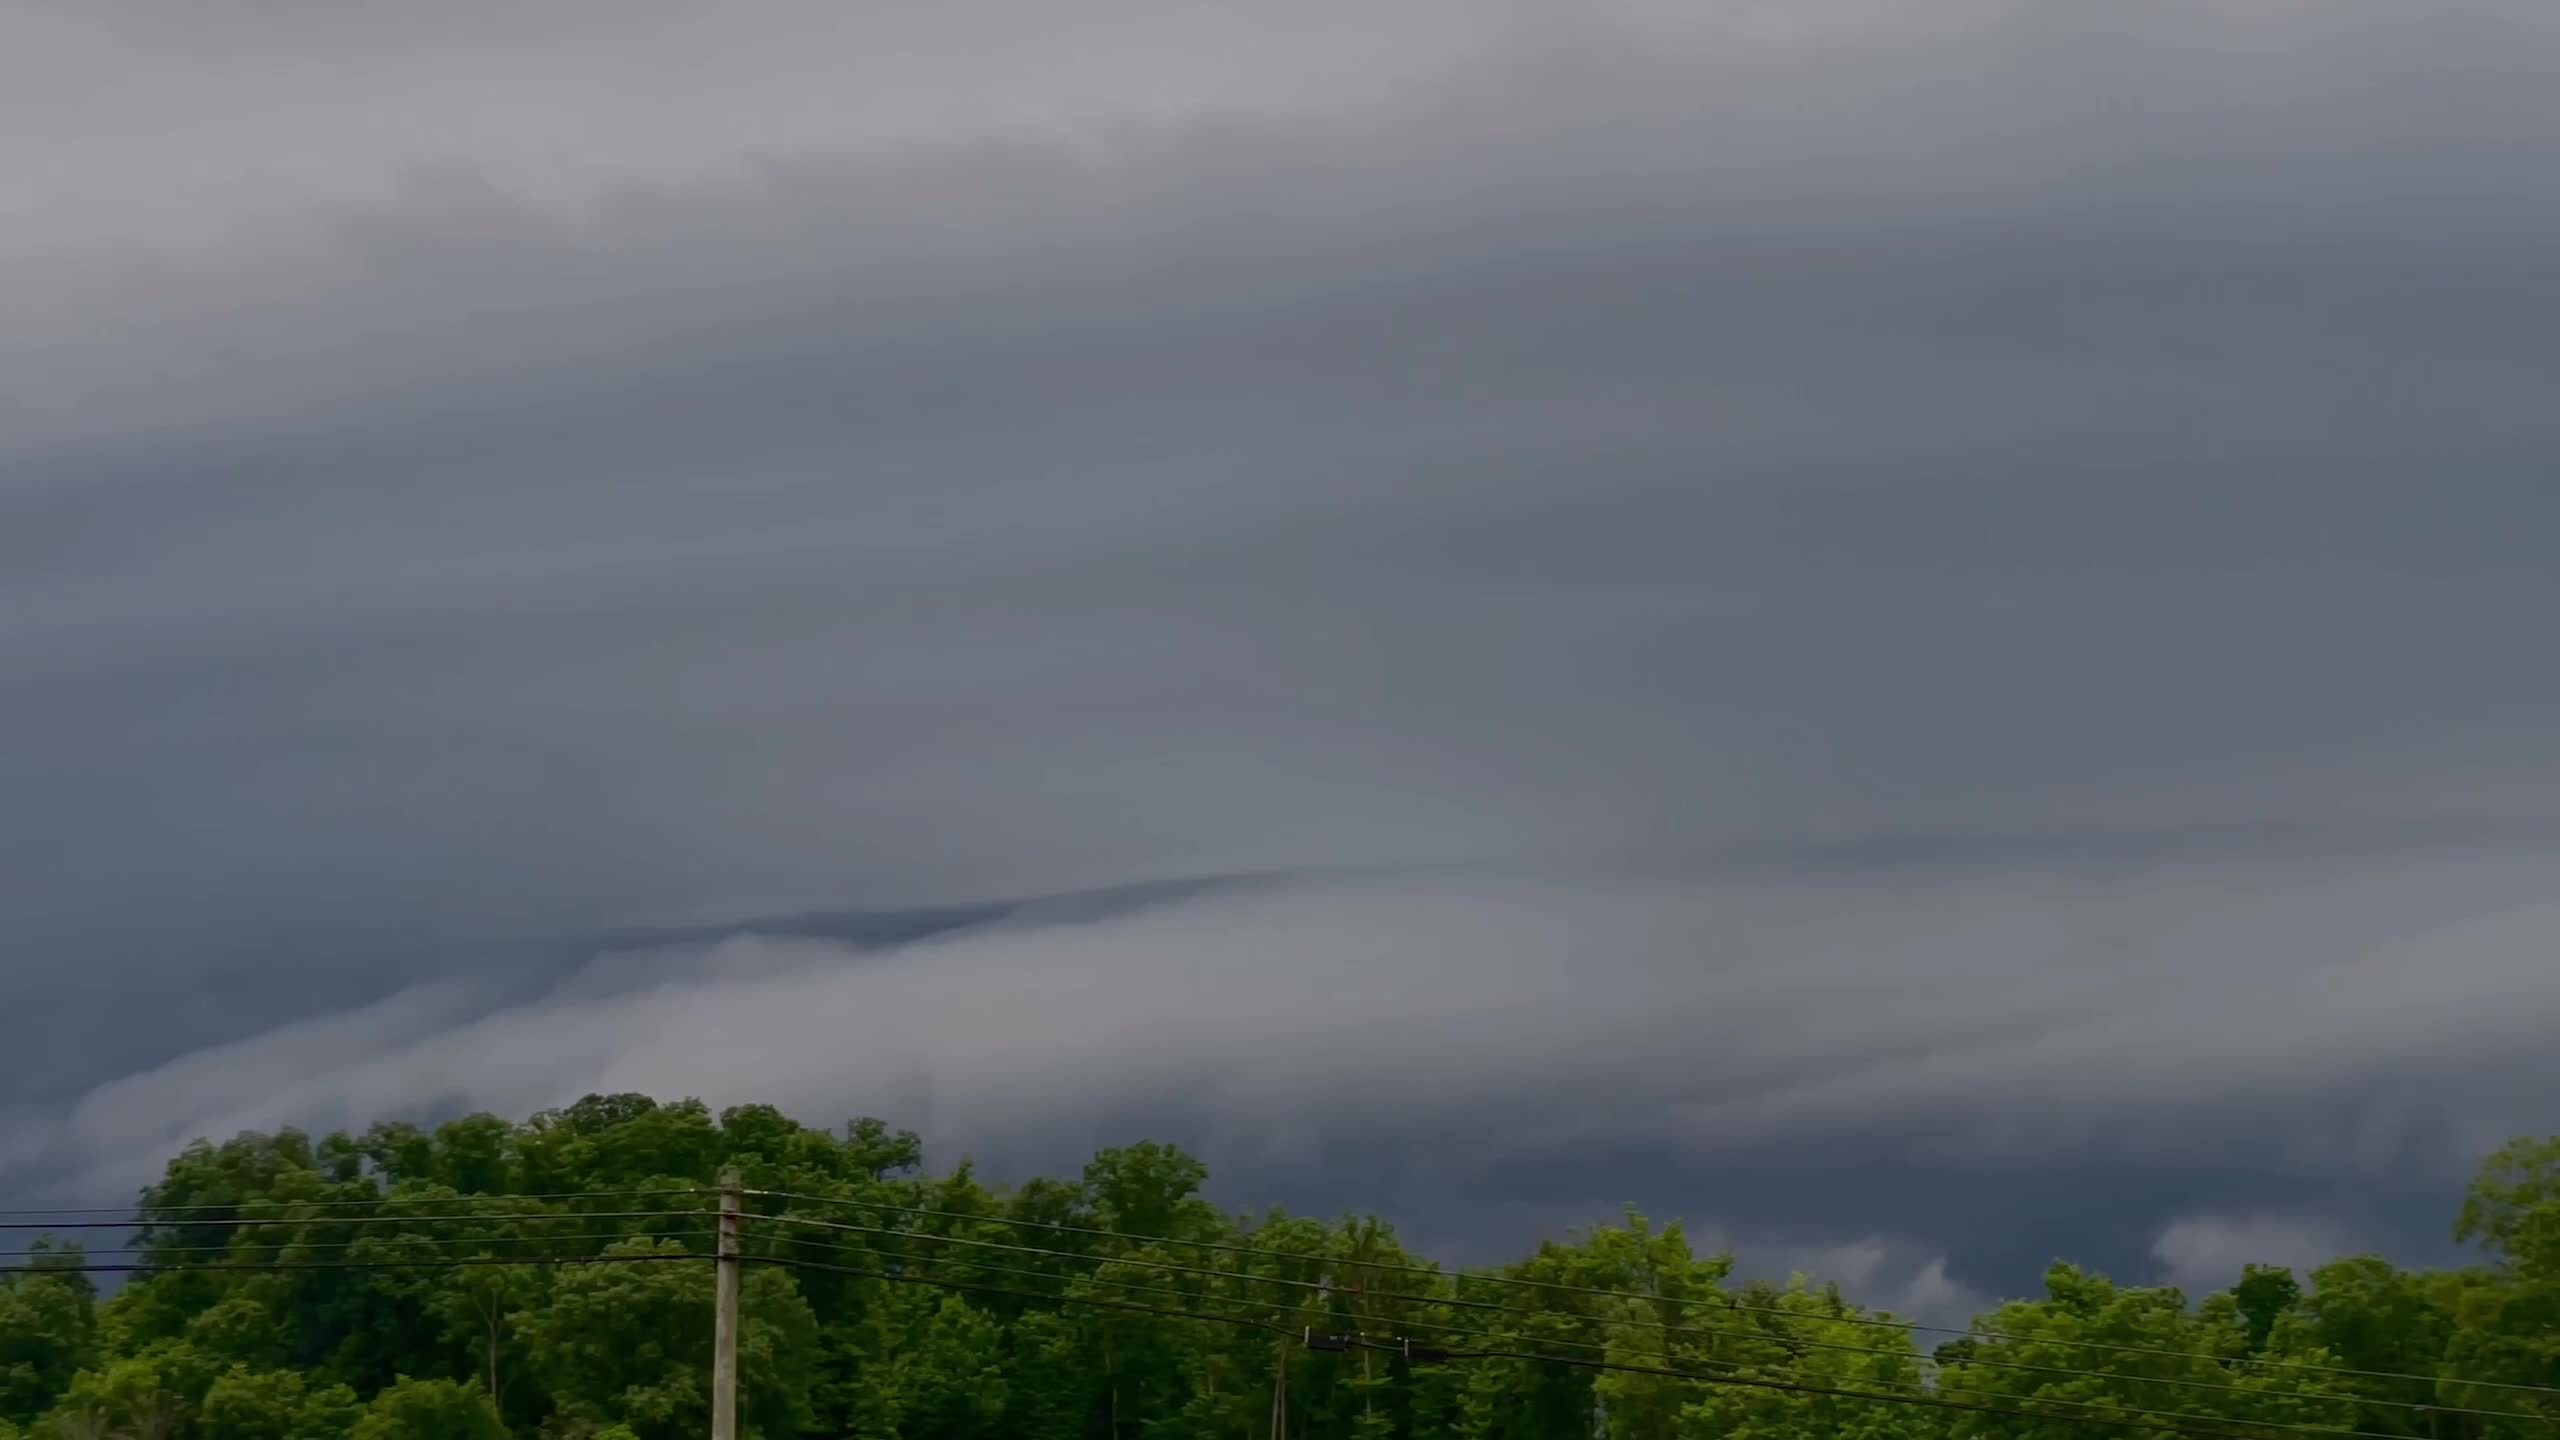 Timelapse of Shelf Clouds Moving Over Plains